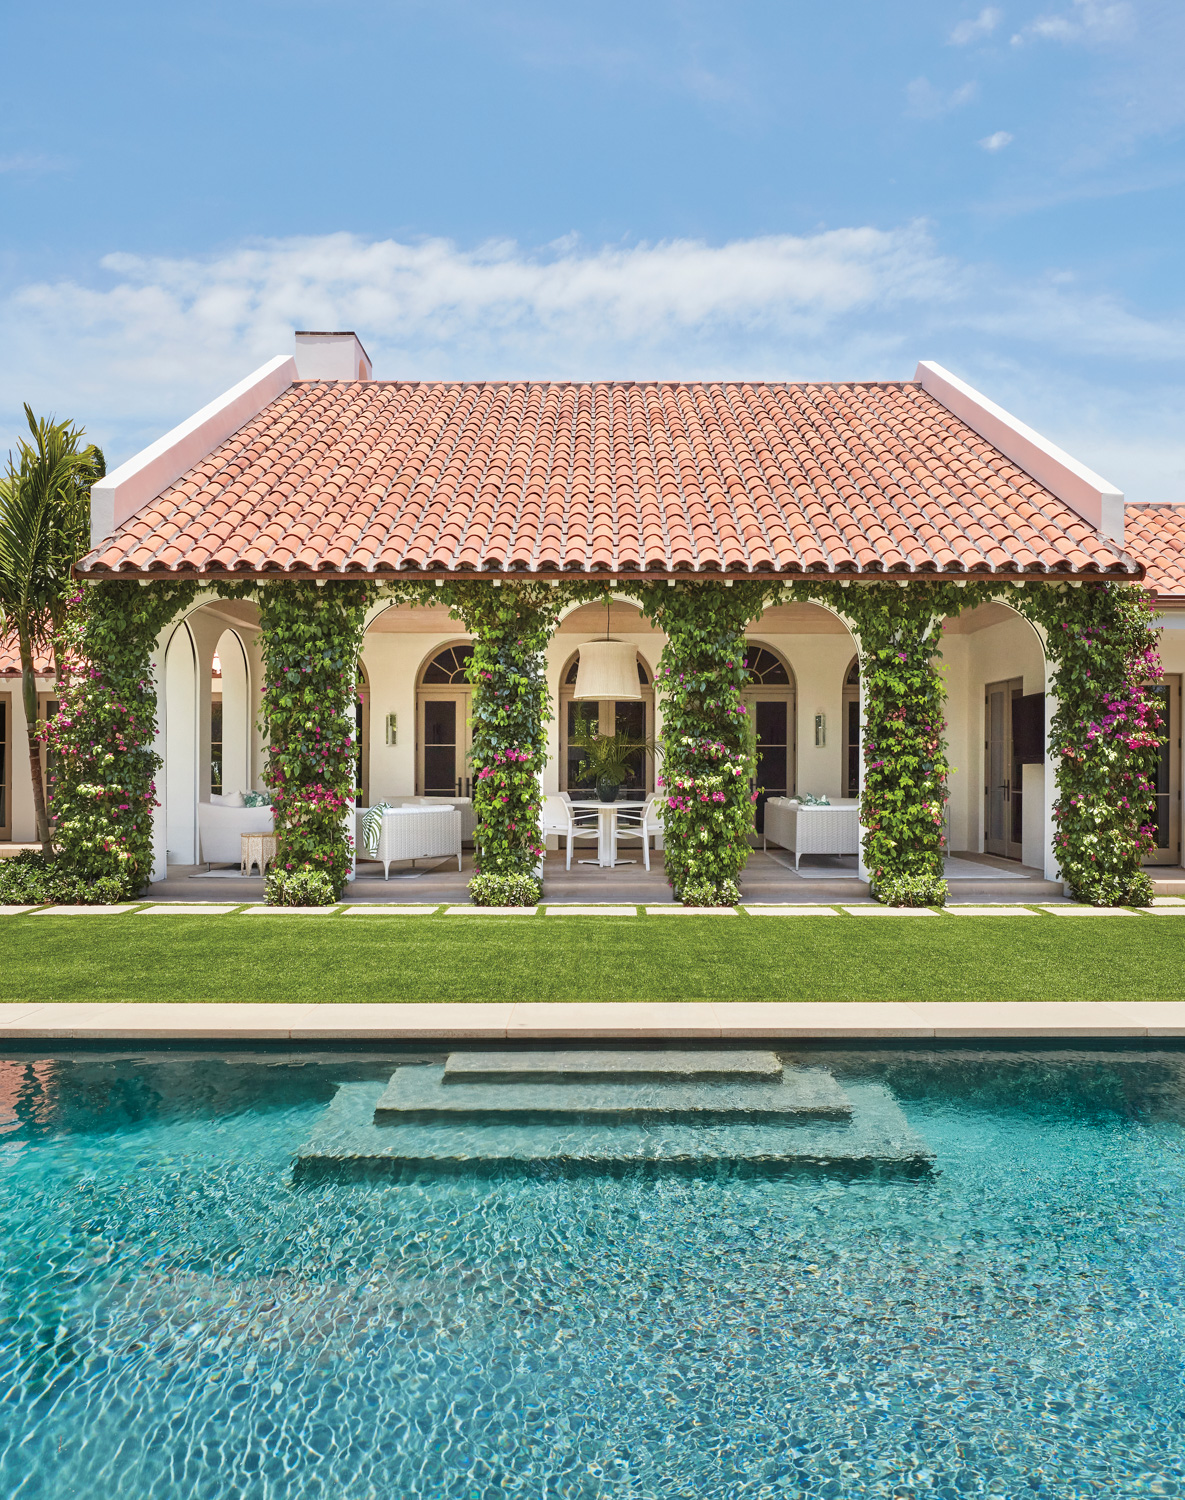 mediterannean-style loggia with bougainvillea on columns in front of pool